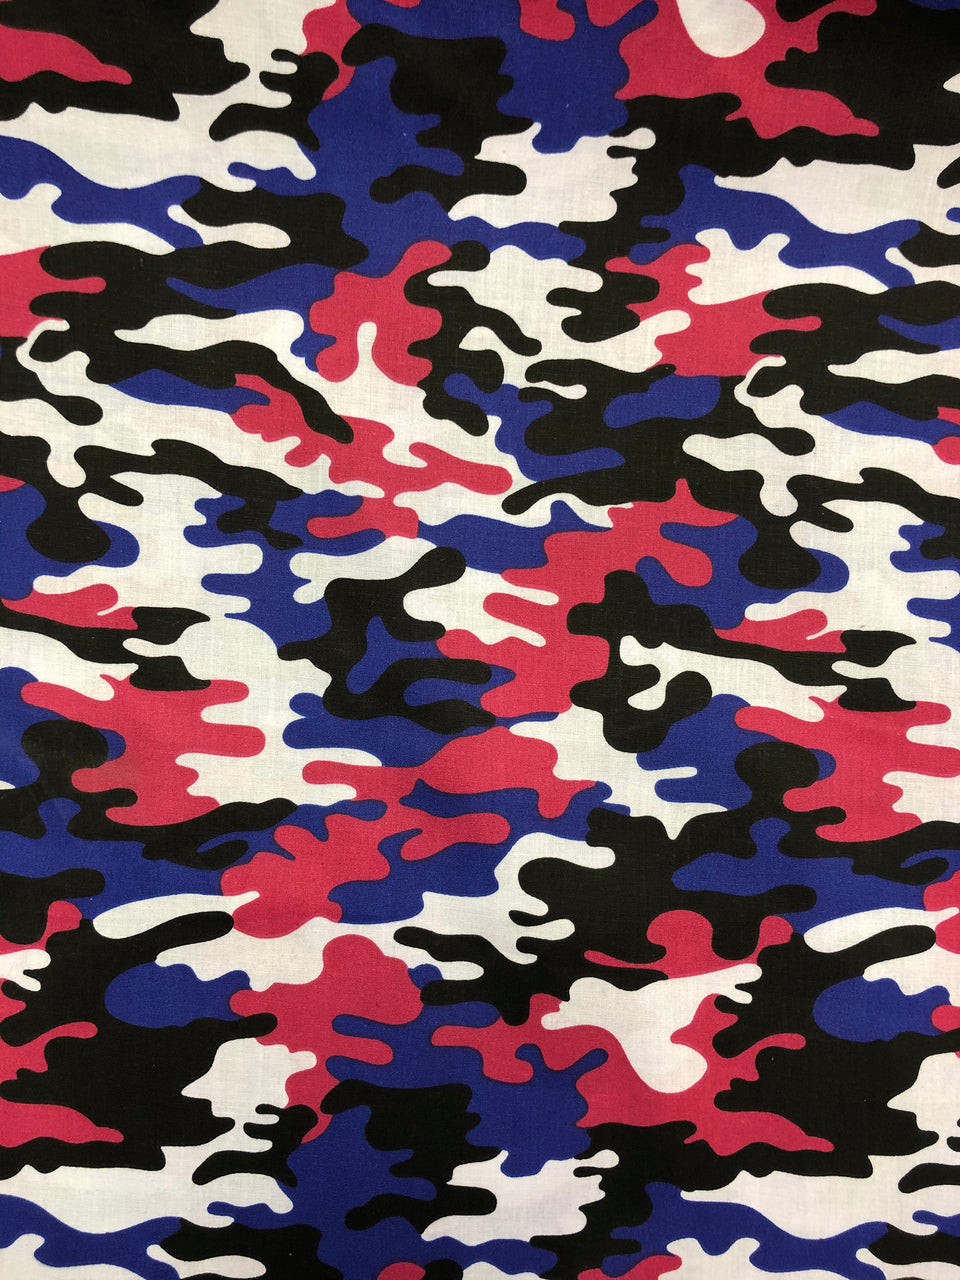 Blue Camouflage – Affordable Textiles